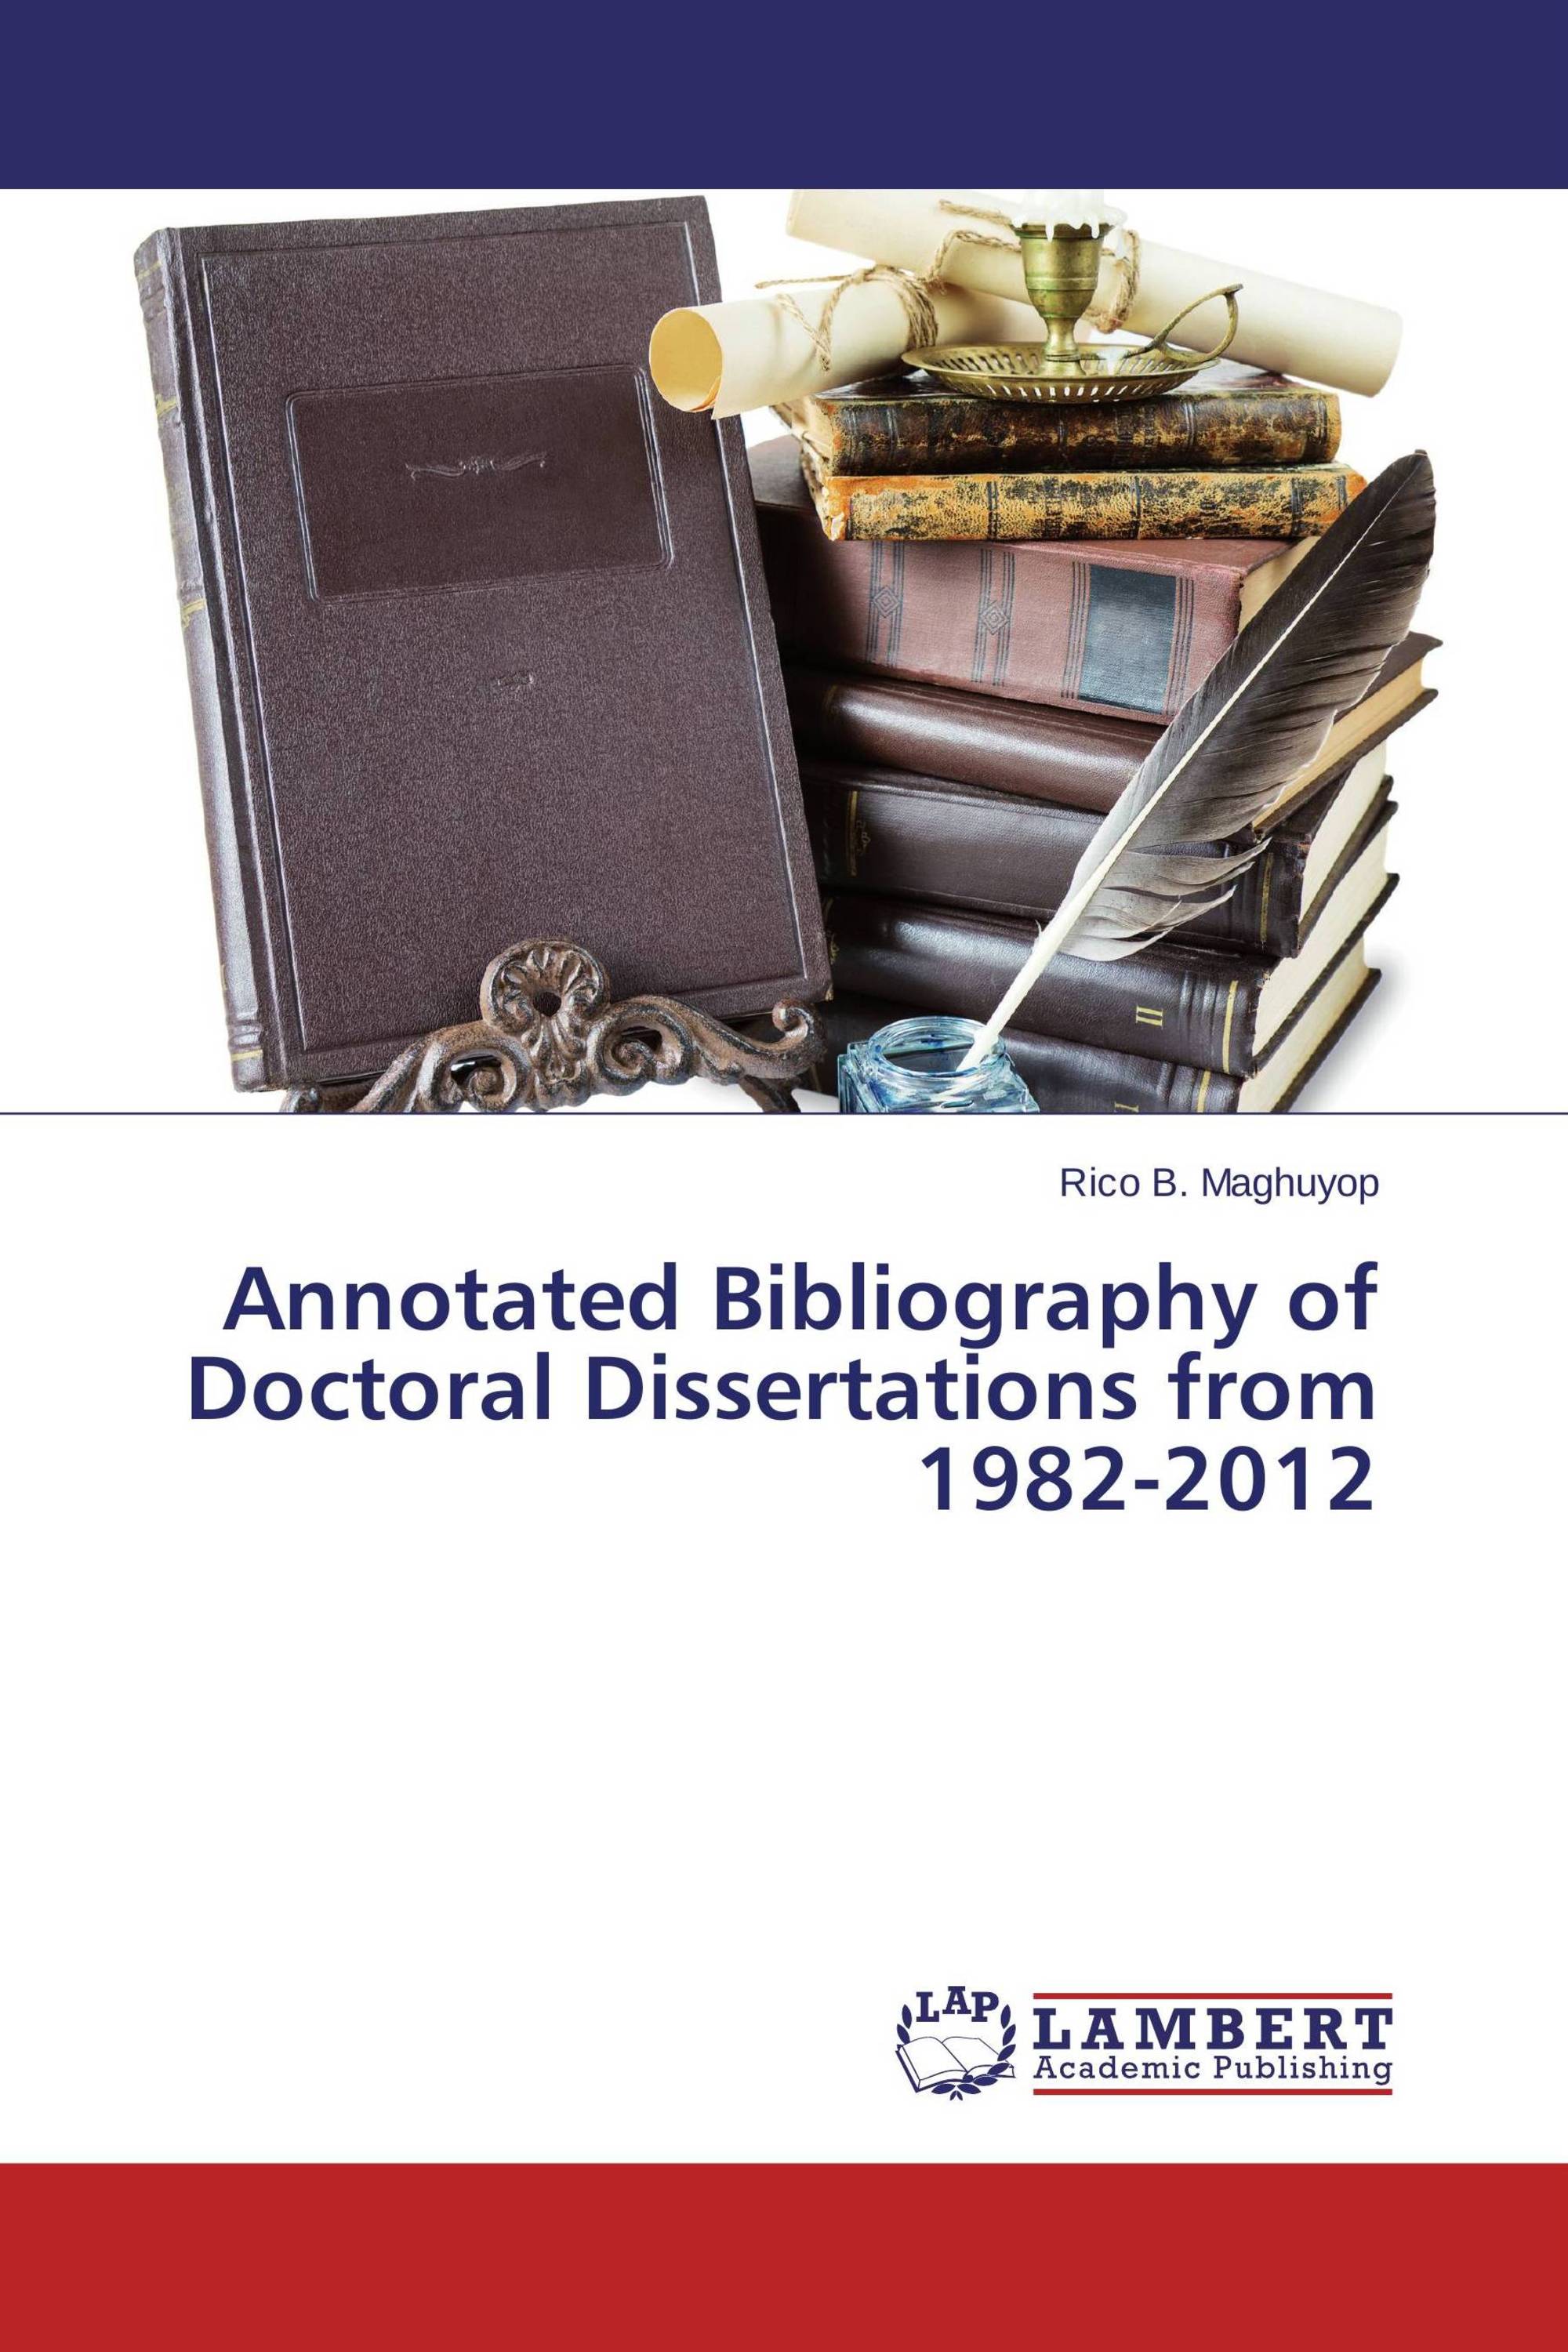 are doctoral dissertations published